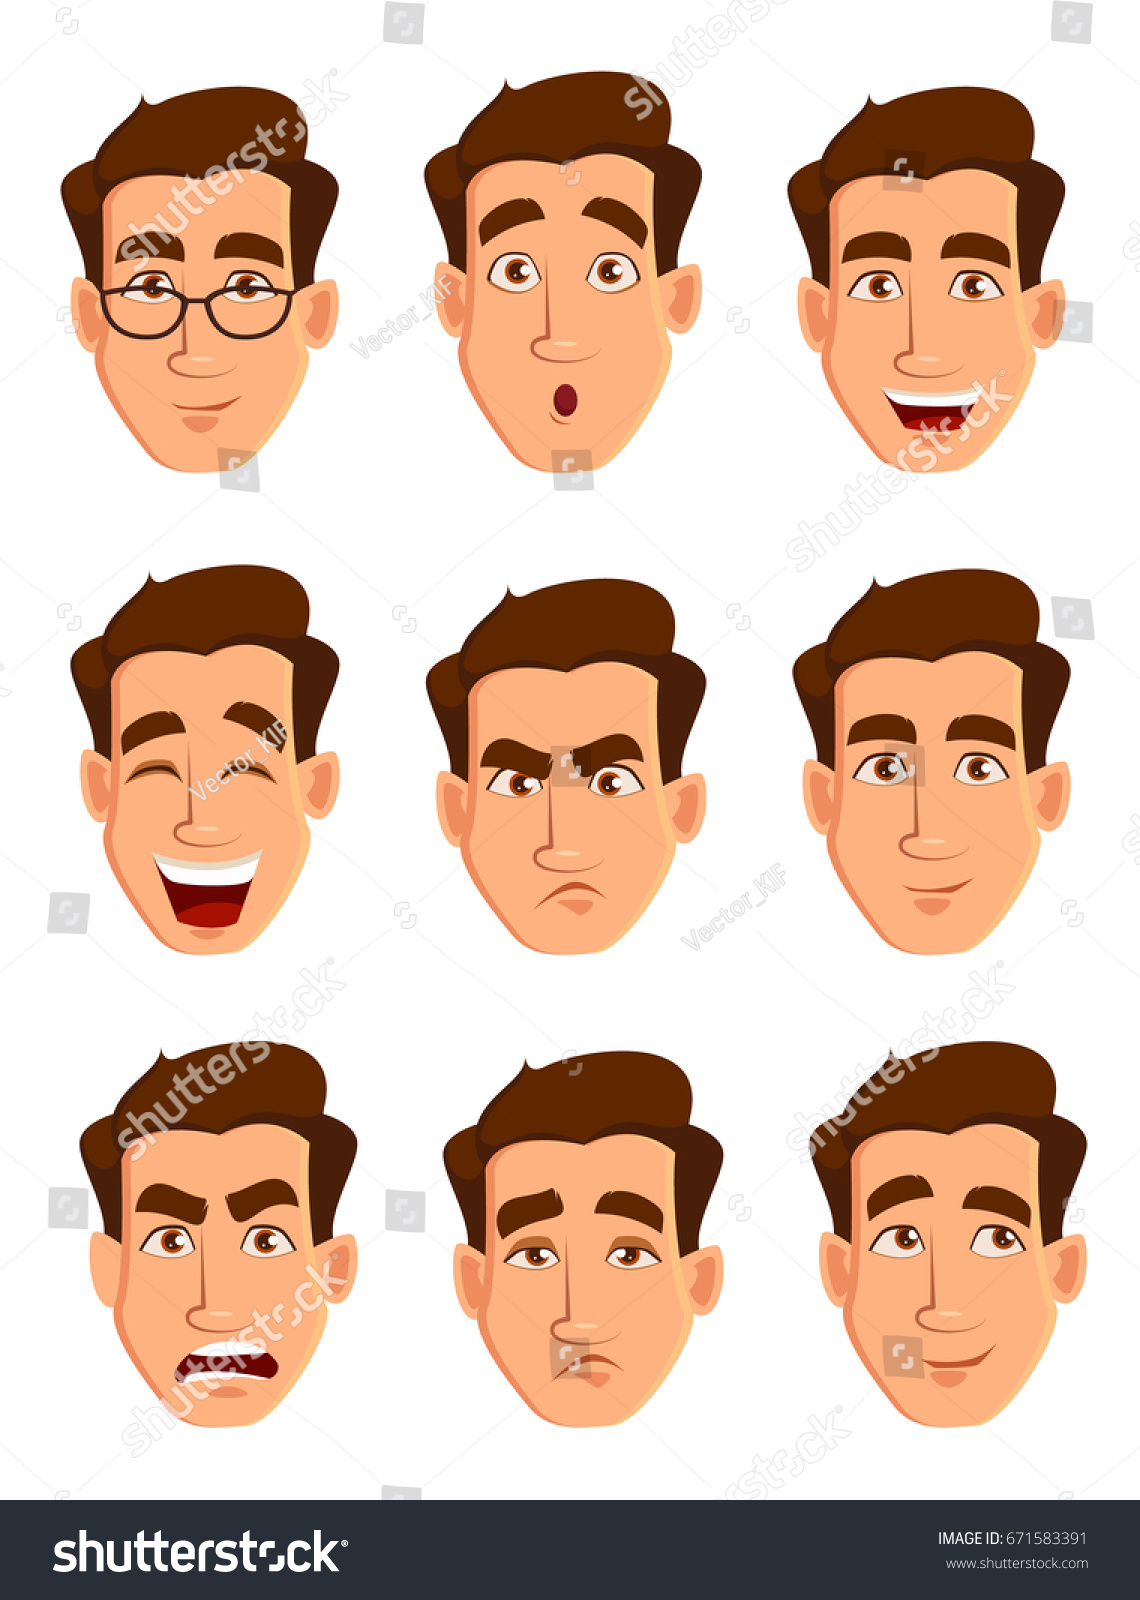 Expression Of Emotions In Men 74